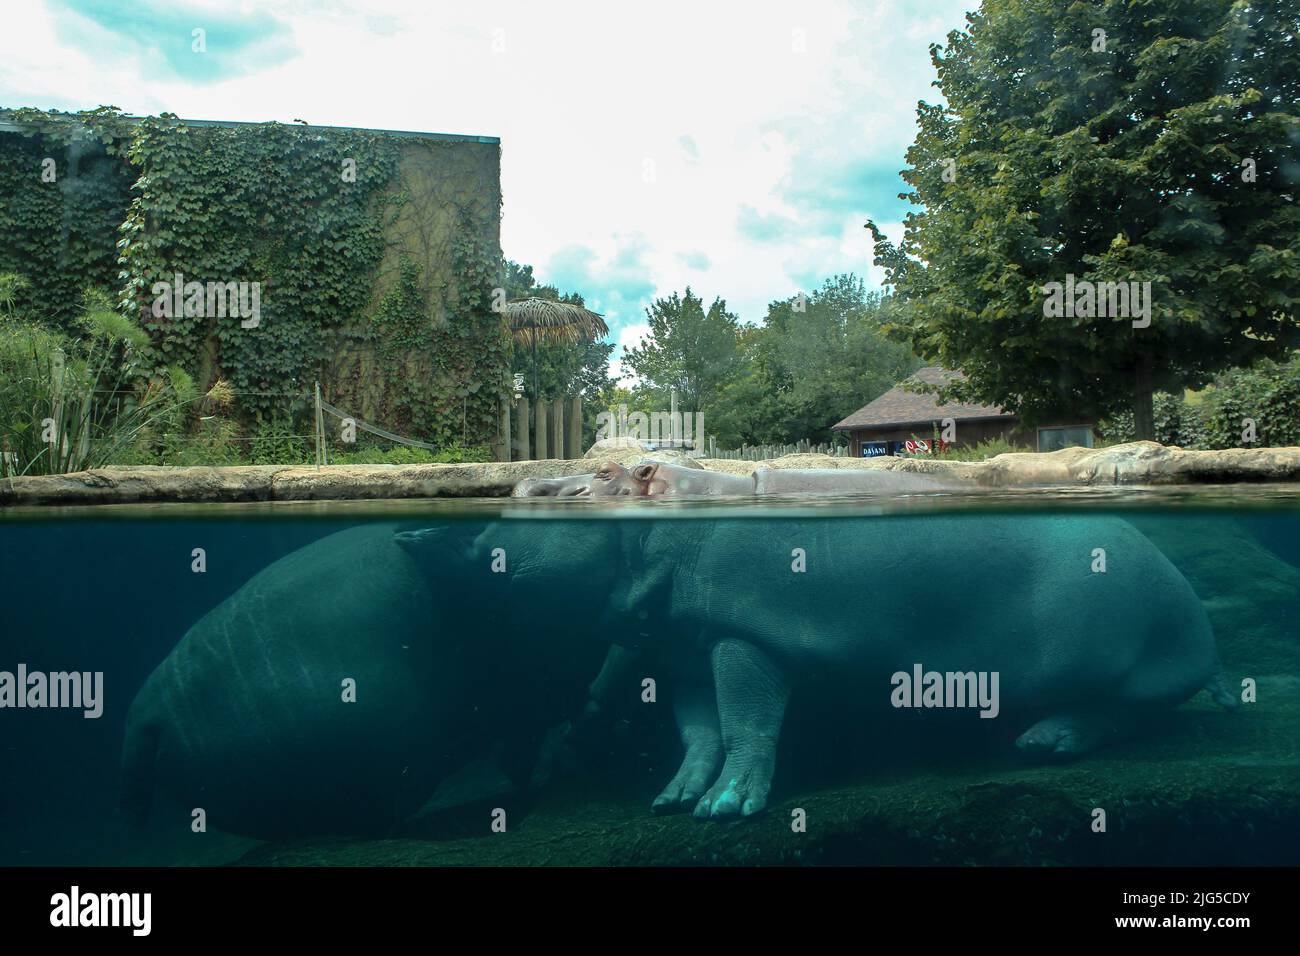 A closeup shot of a hippopotamus under the water at the zoo. Hippo is resting under water. Stock Photo